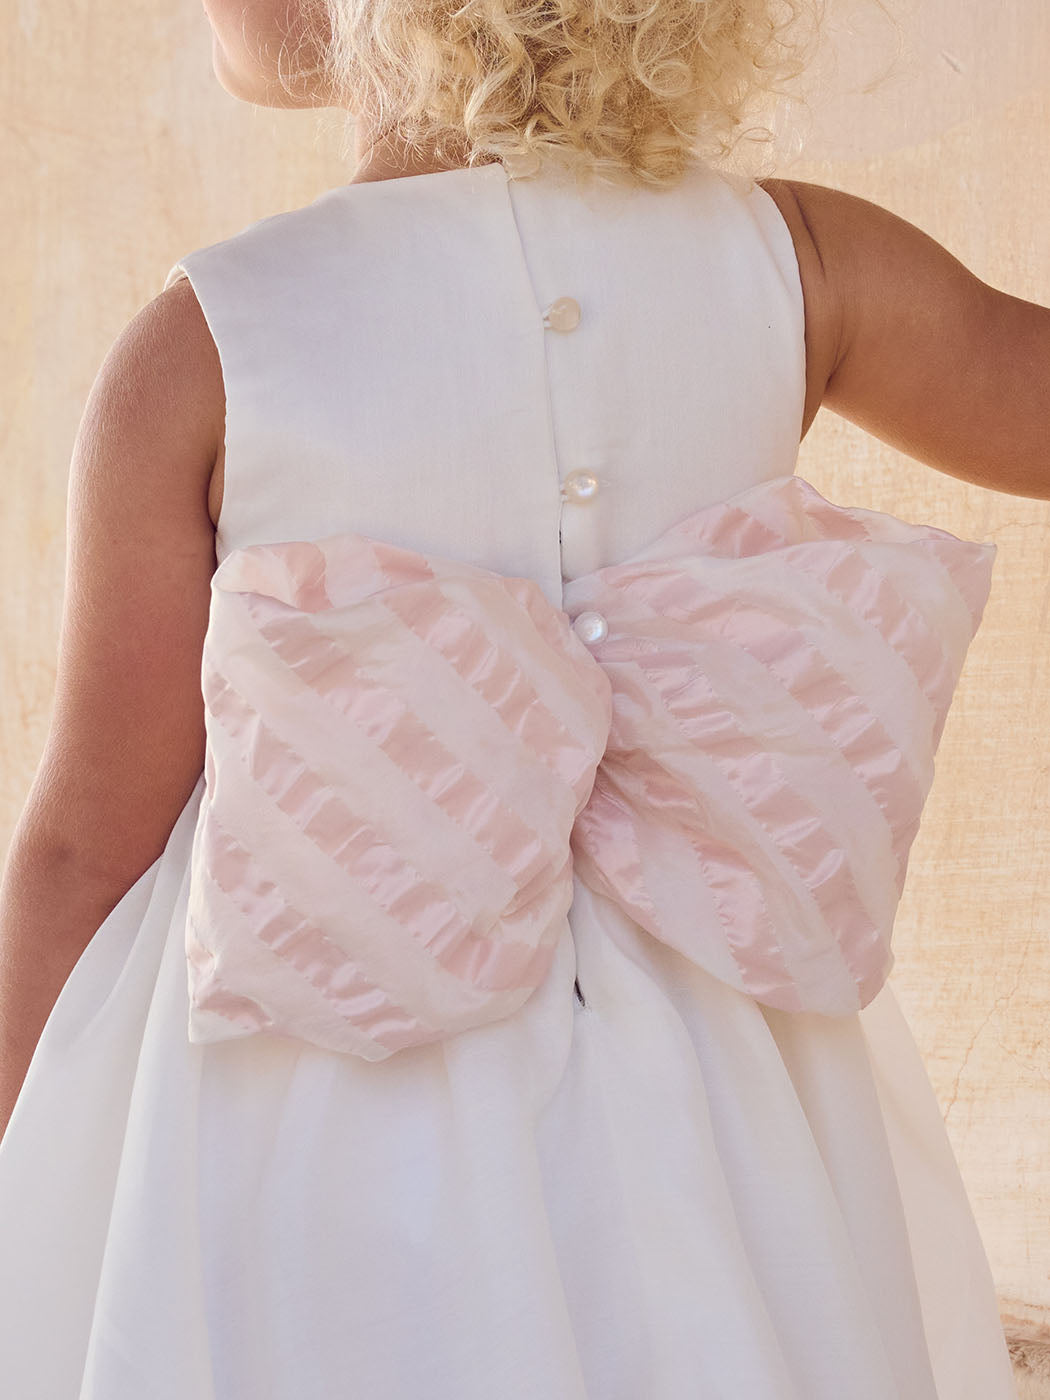 Baptism silk dress with bow - YVONNE white